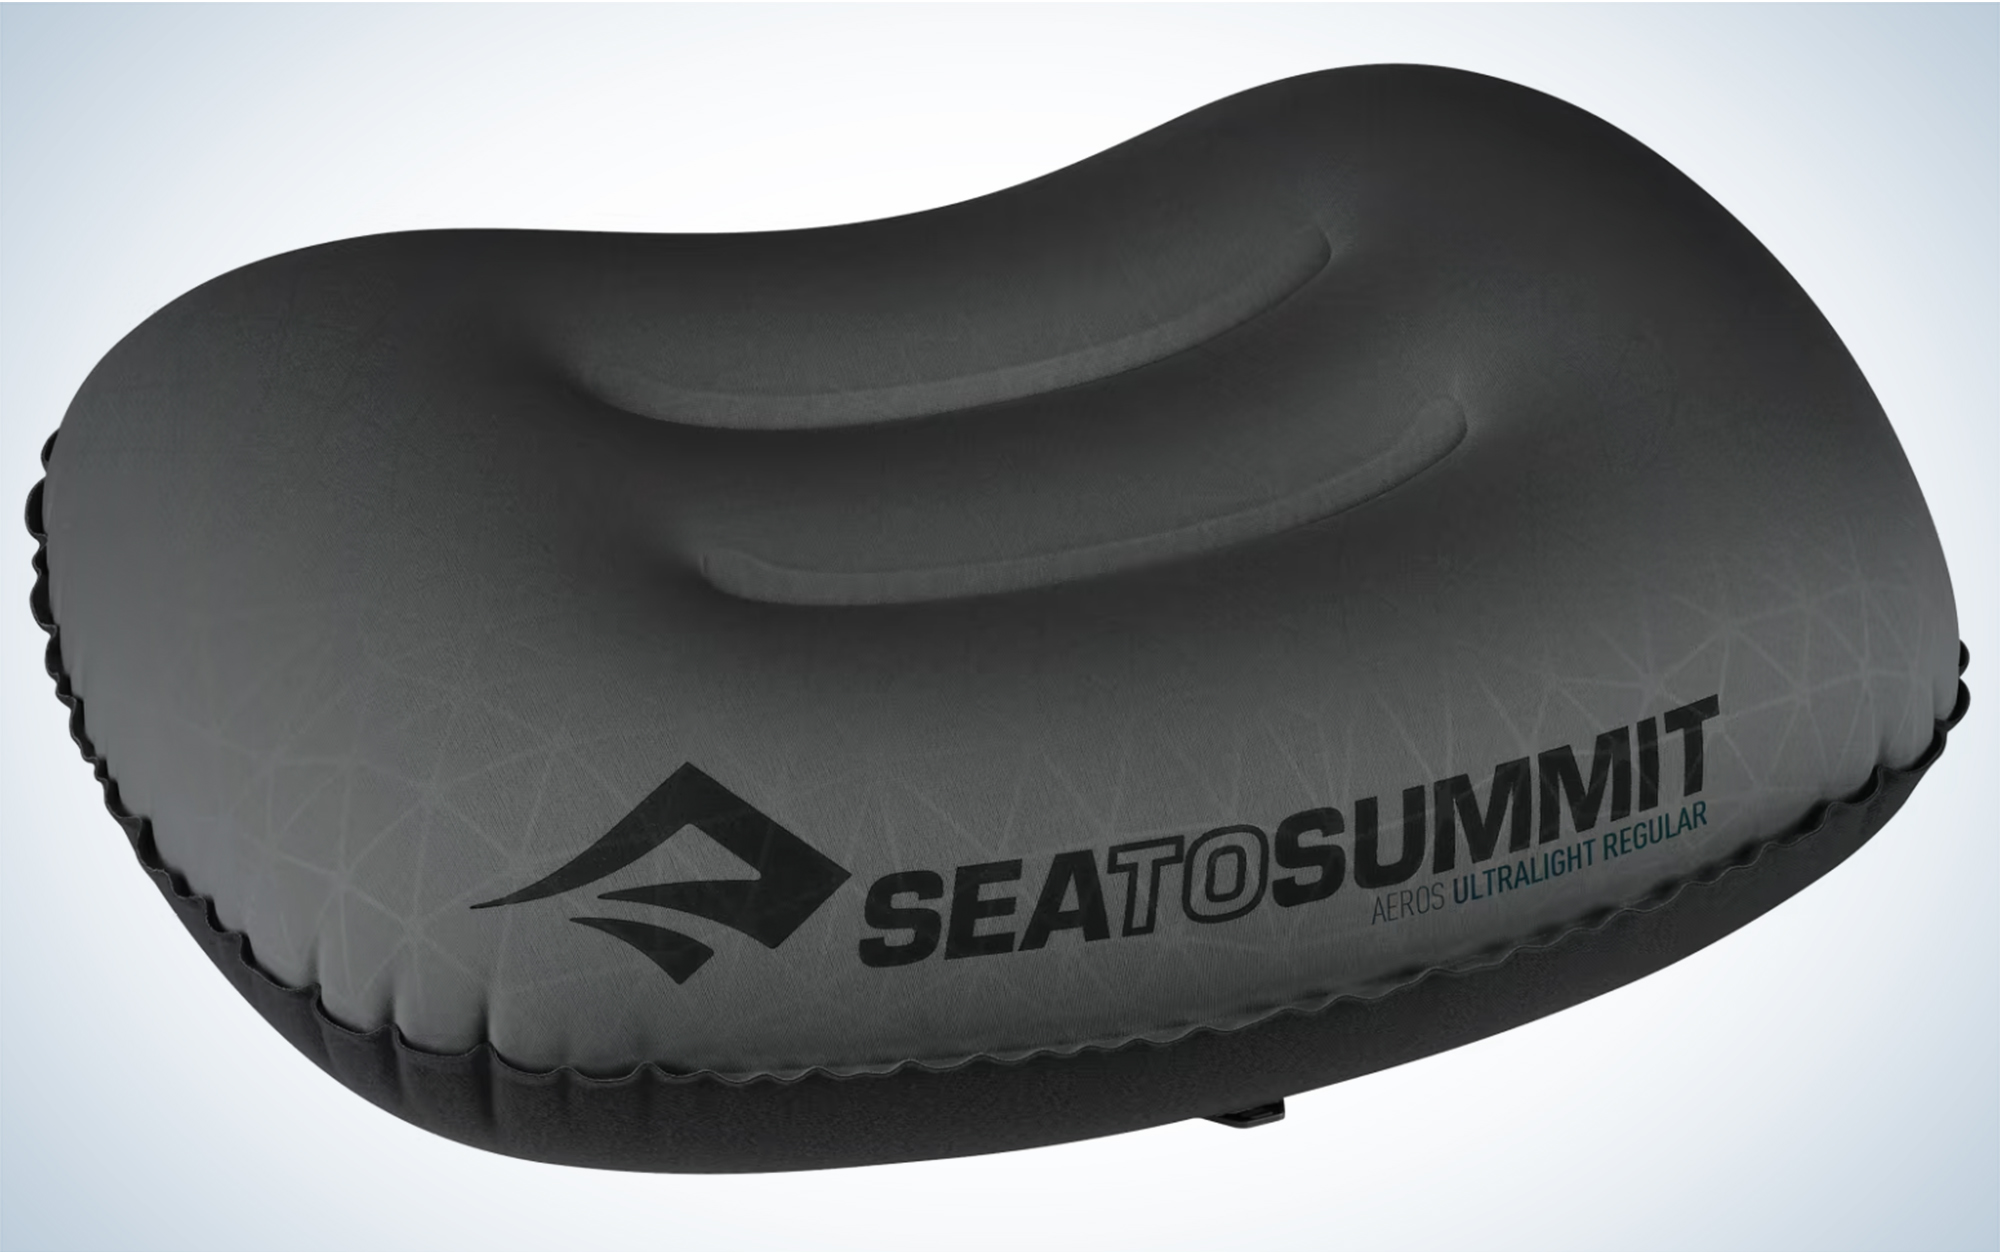 The Sea to Summit Aeros Down Pillow is the best oversize backpacking pillow.